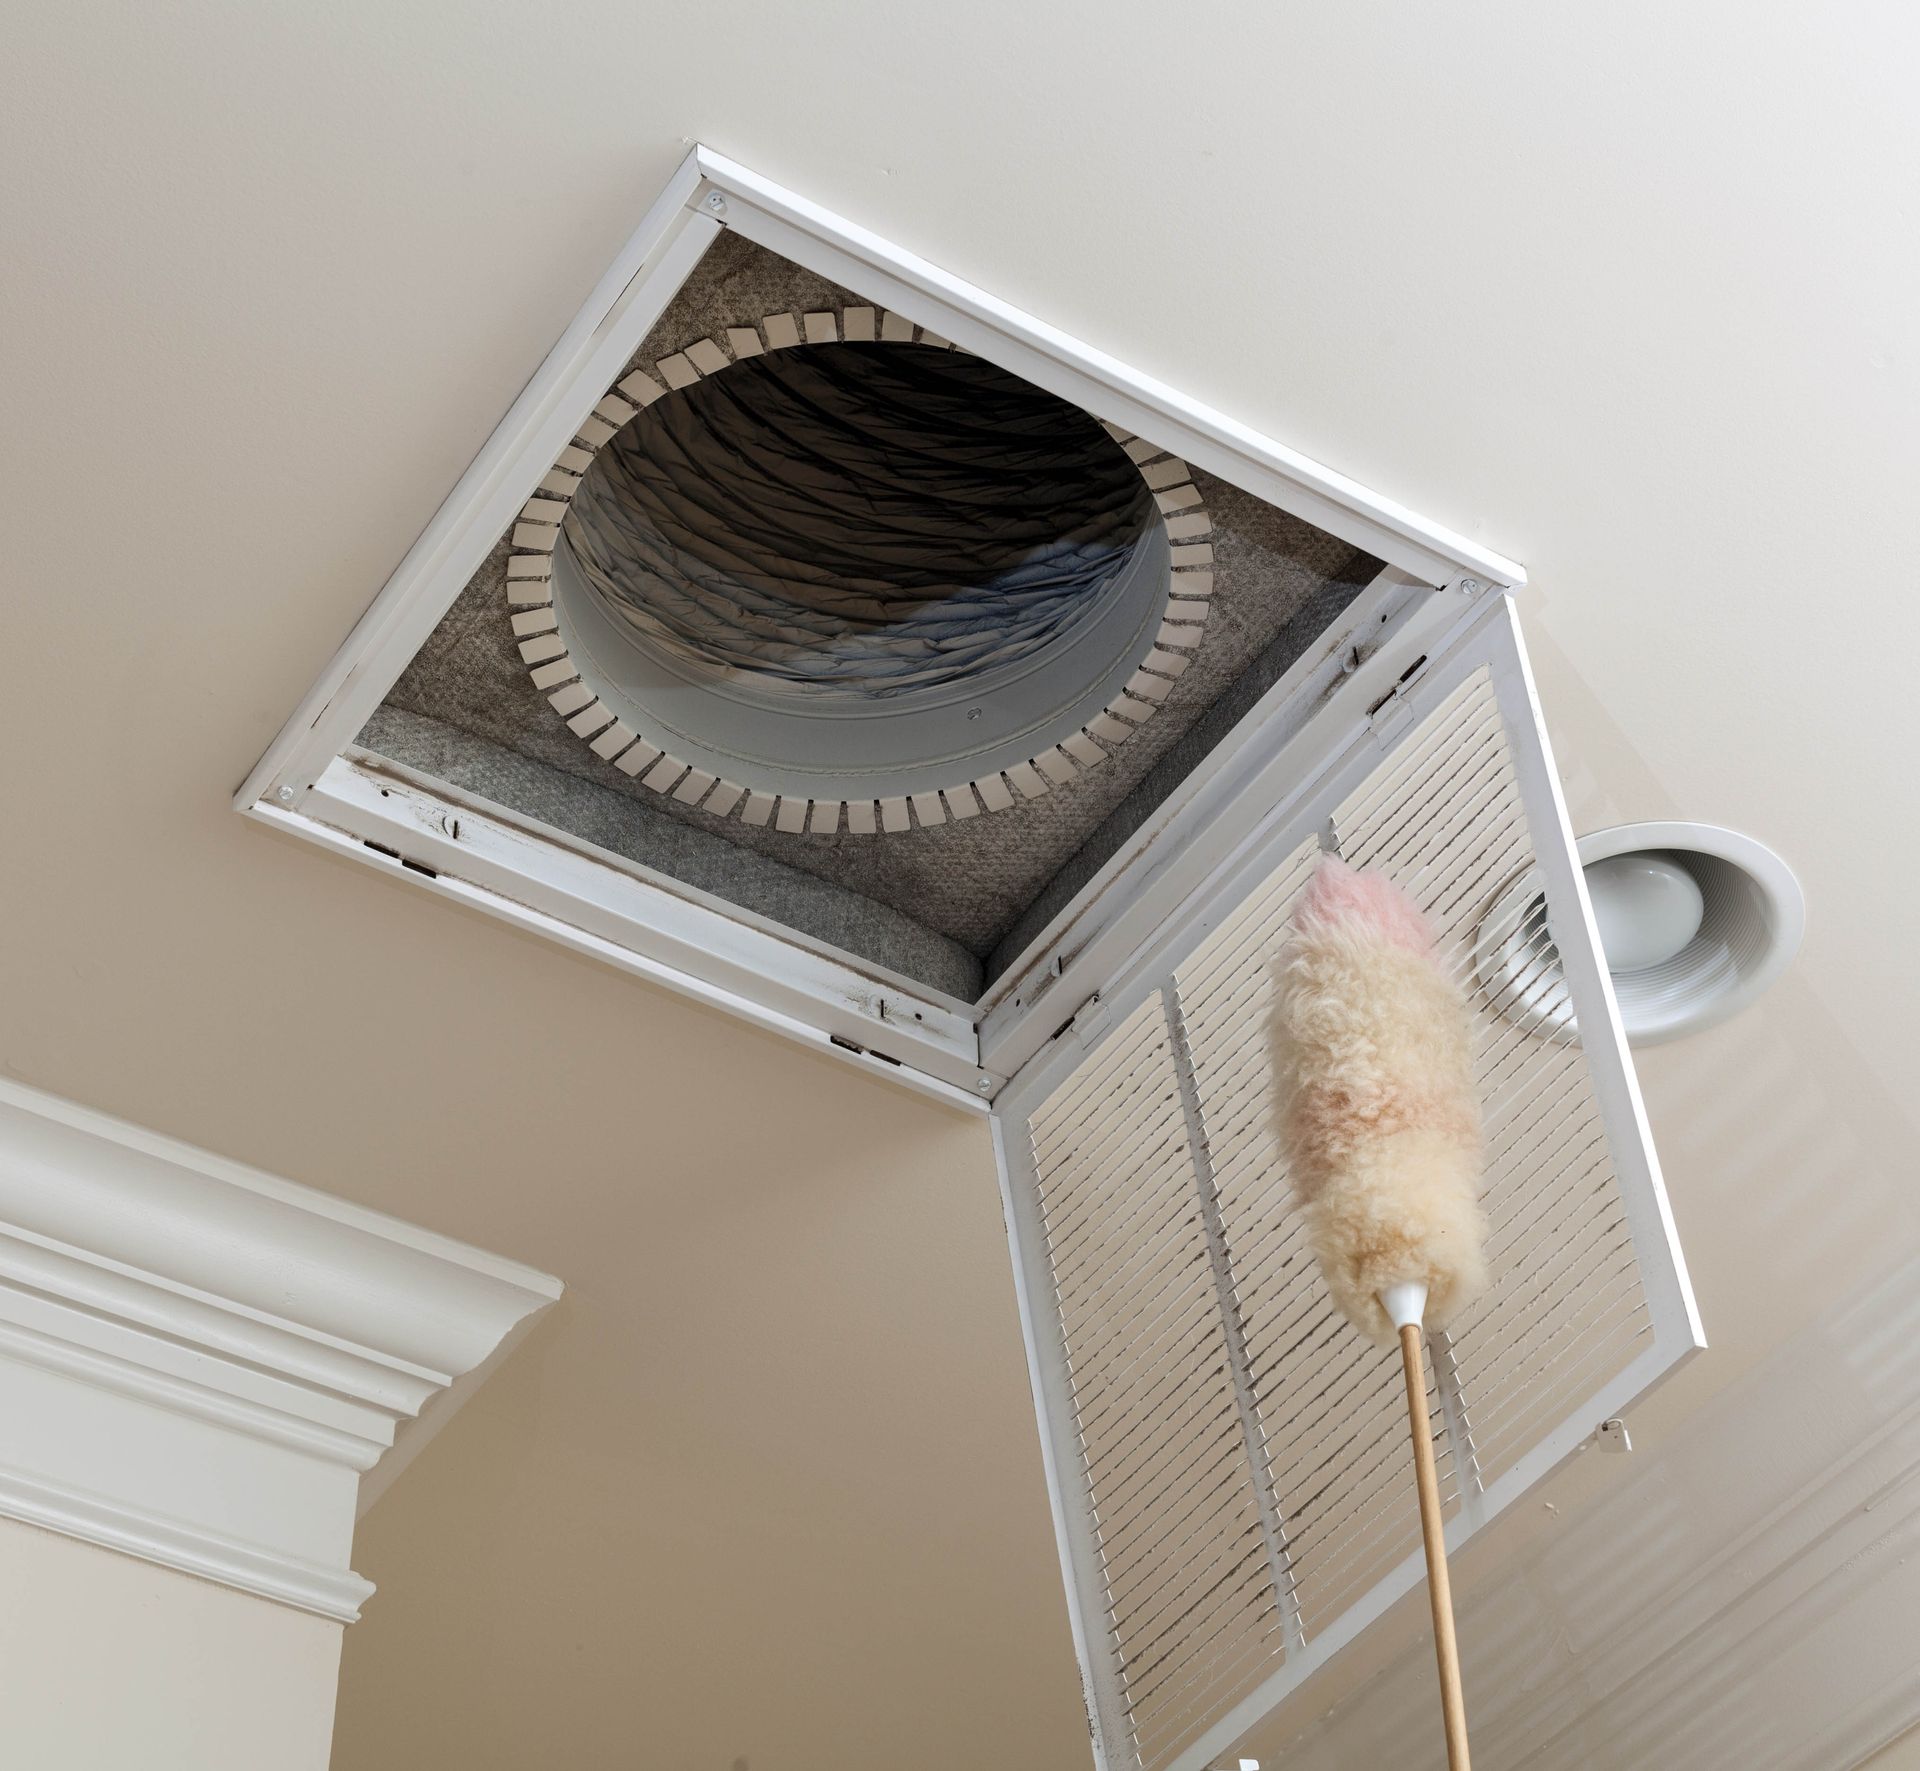 air duct cleaning company